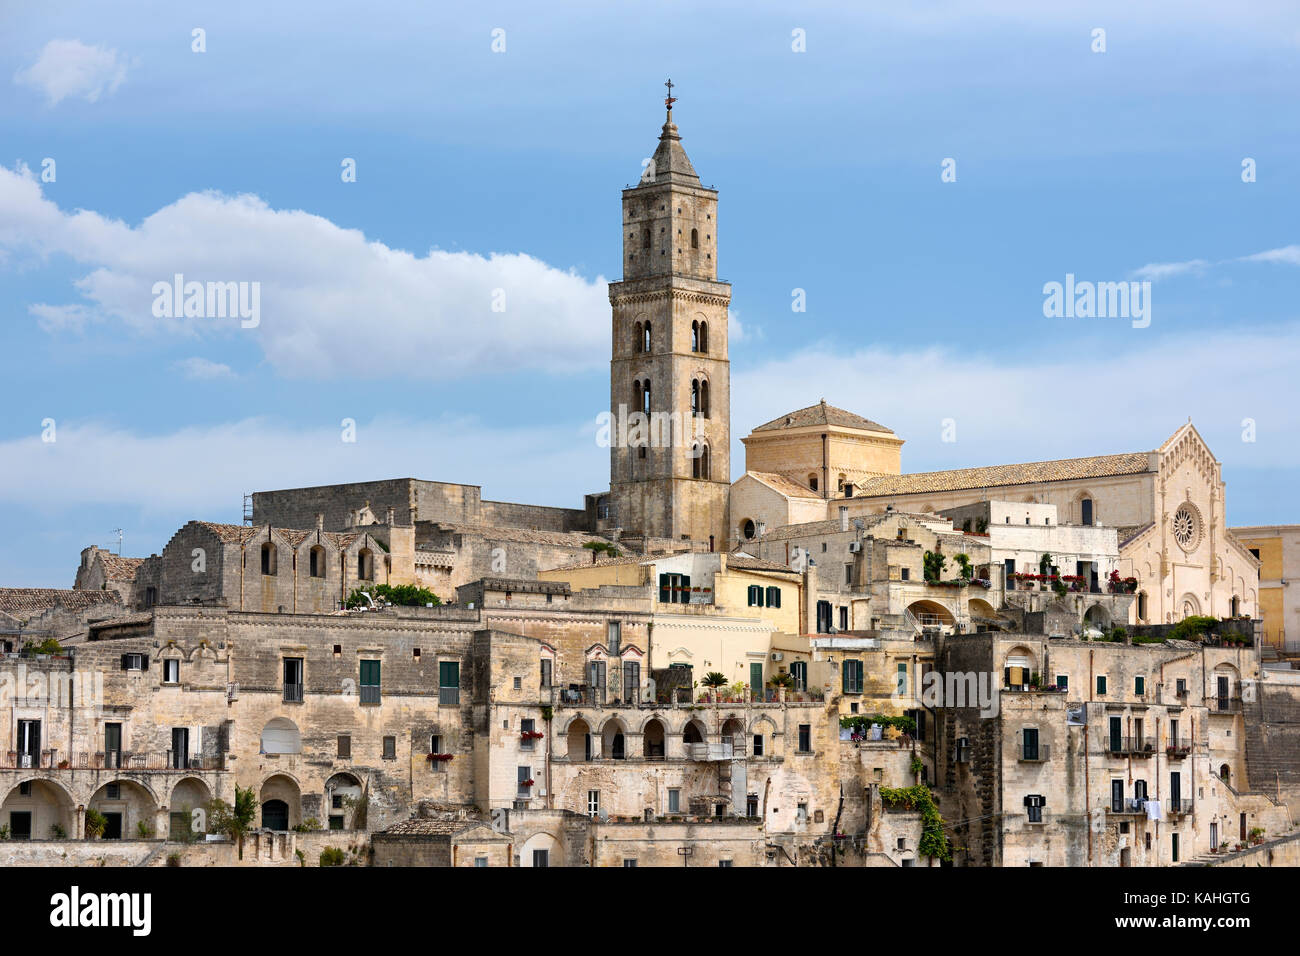 Medieval old town with cathedral, Sassi di Matera, Capital of Culture 2019, Matera, province of Basilicata, Italy Stock Photo